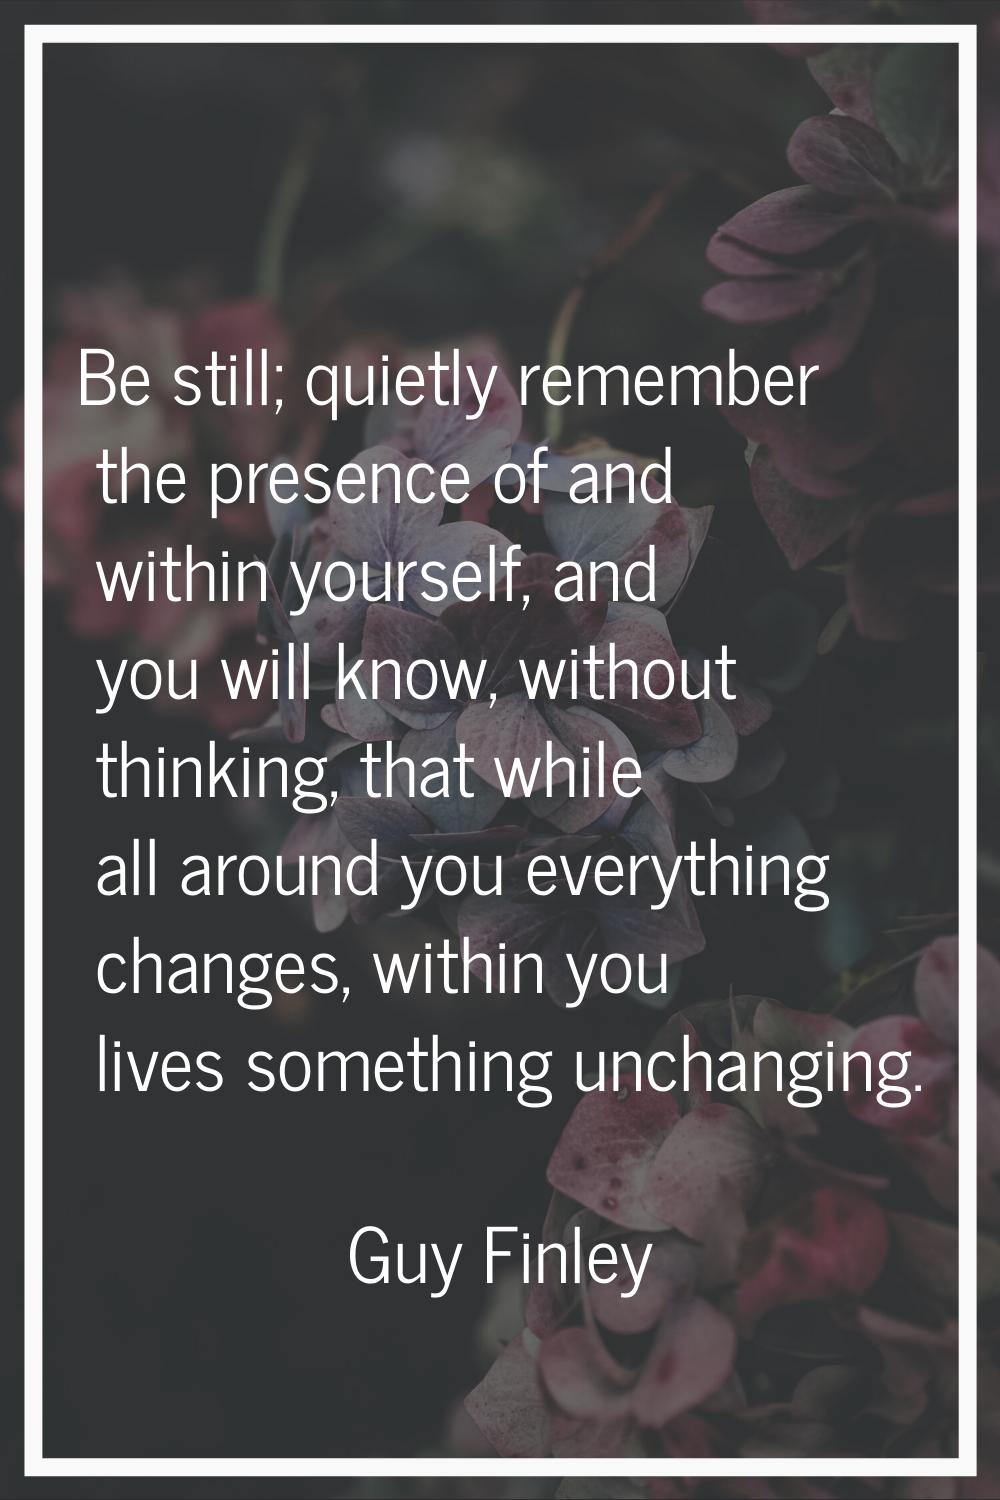 Be still; quietly remember the presence of and within yourself, and you will know, without thinking